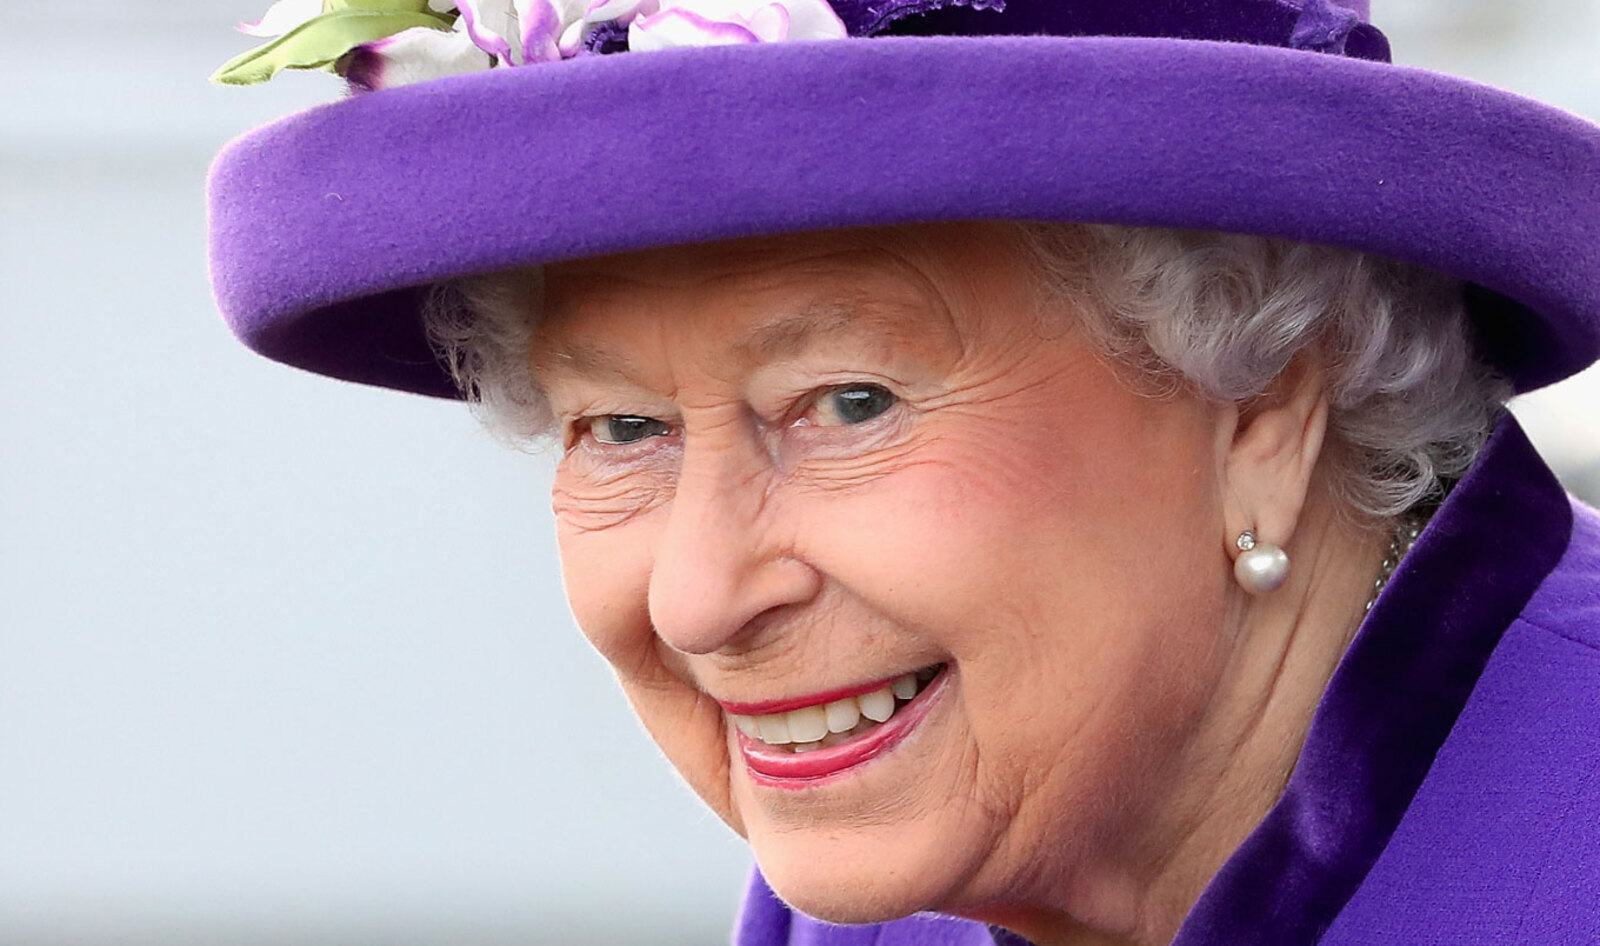 The Queen of England Ditches Fur for Good